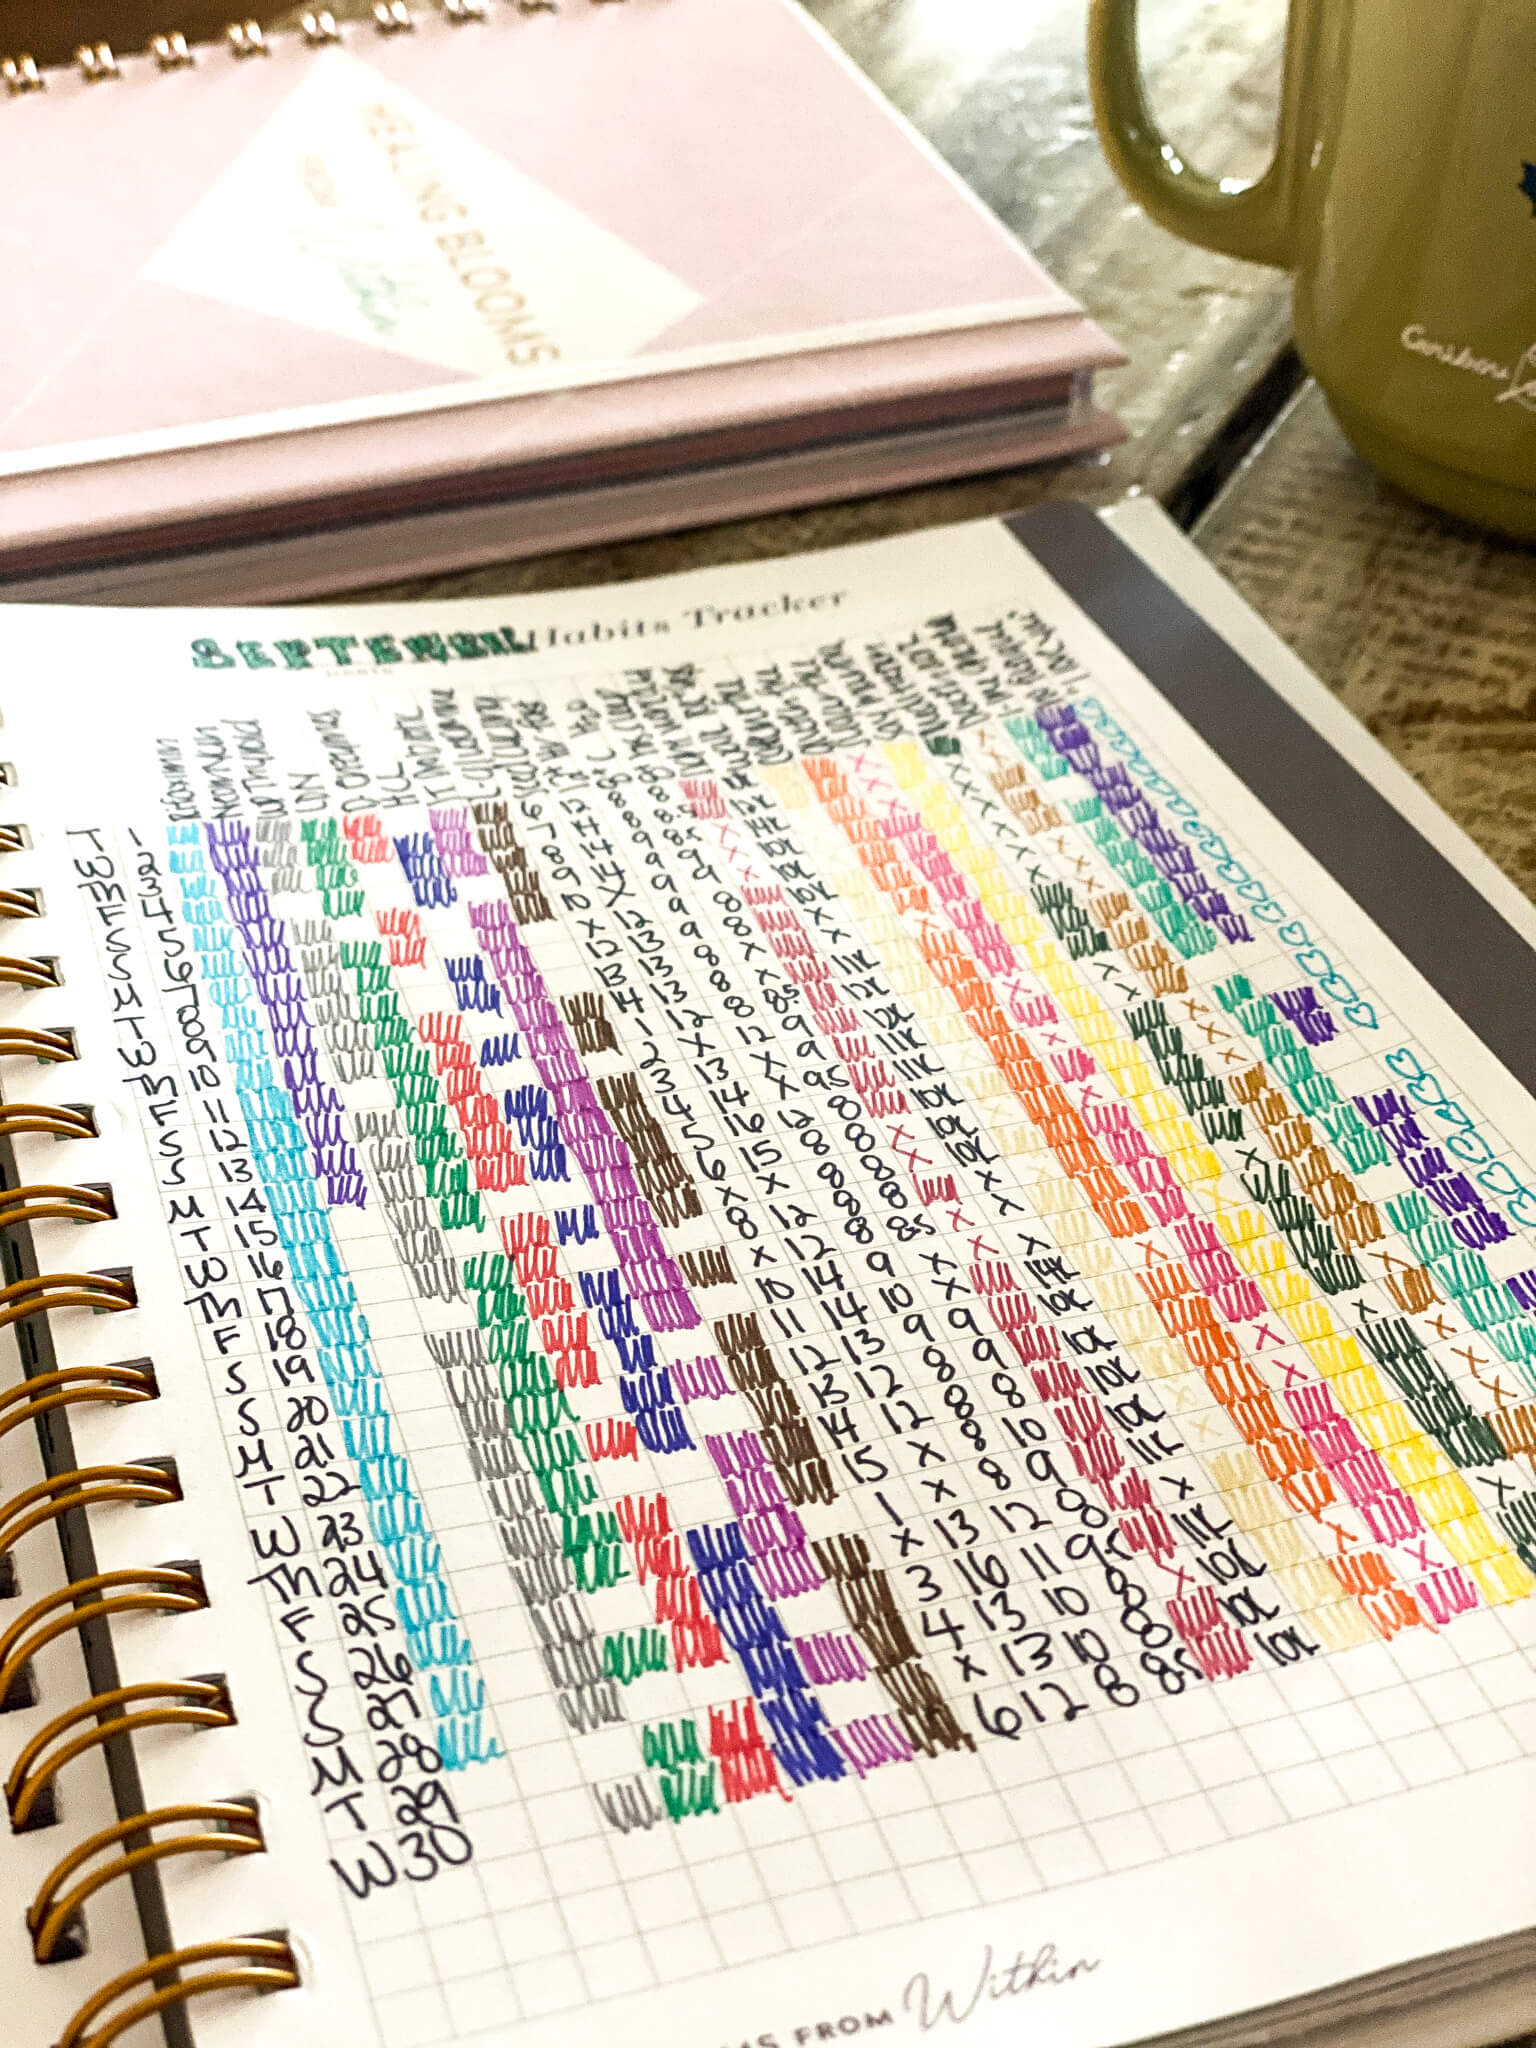 34 gut health and healing habits to track in your bullet journal agutsygirl.com #guthealing #foodjournal #eliminationdiet #healthlog food journal